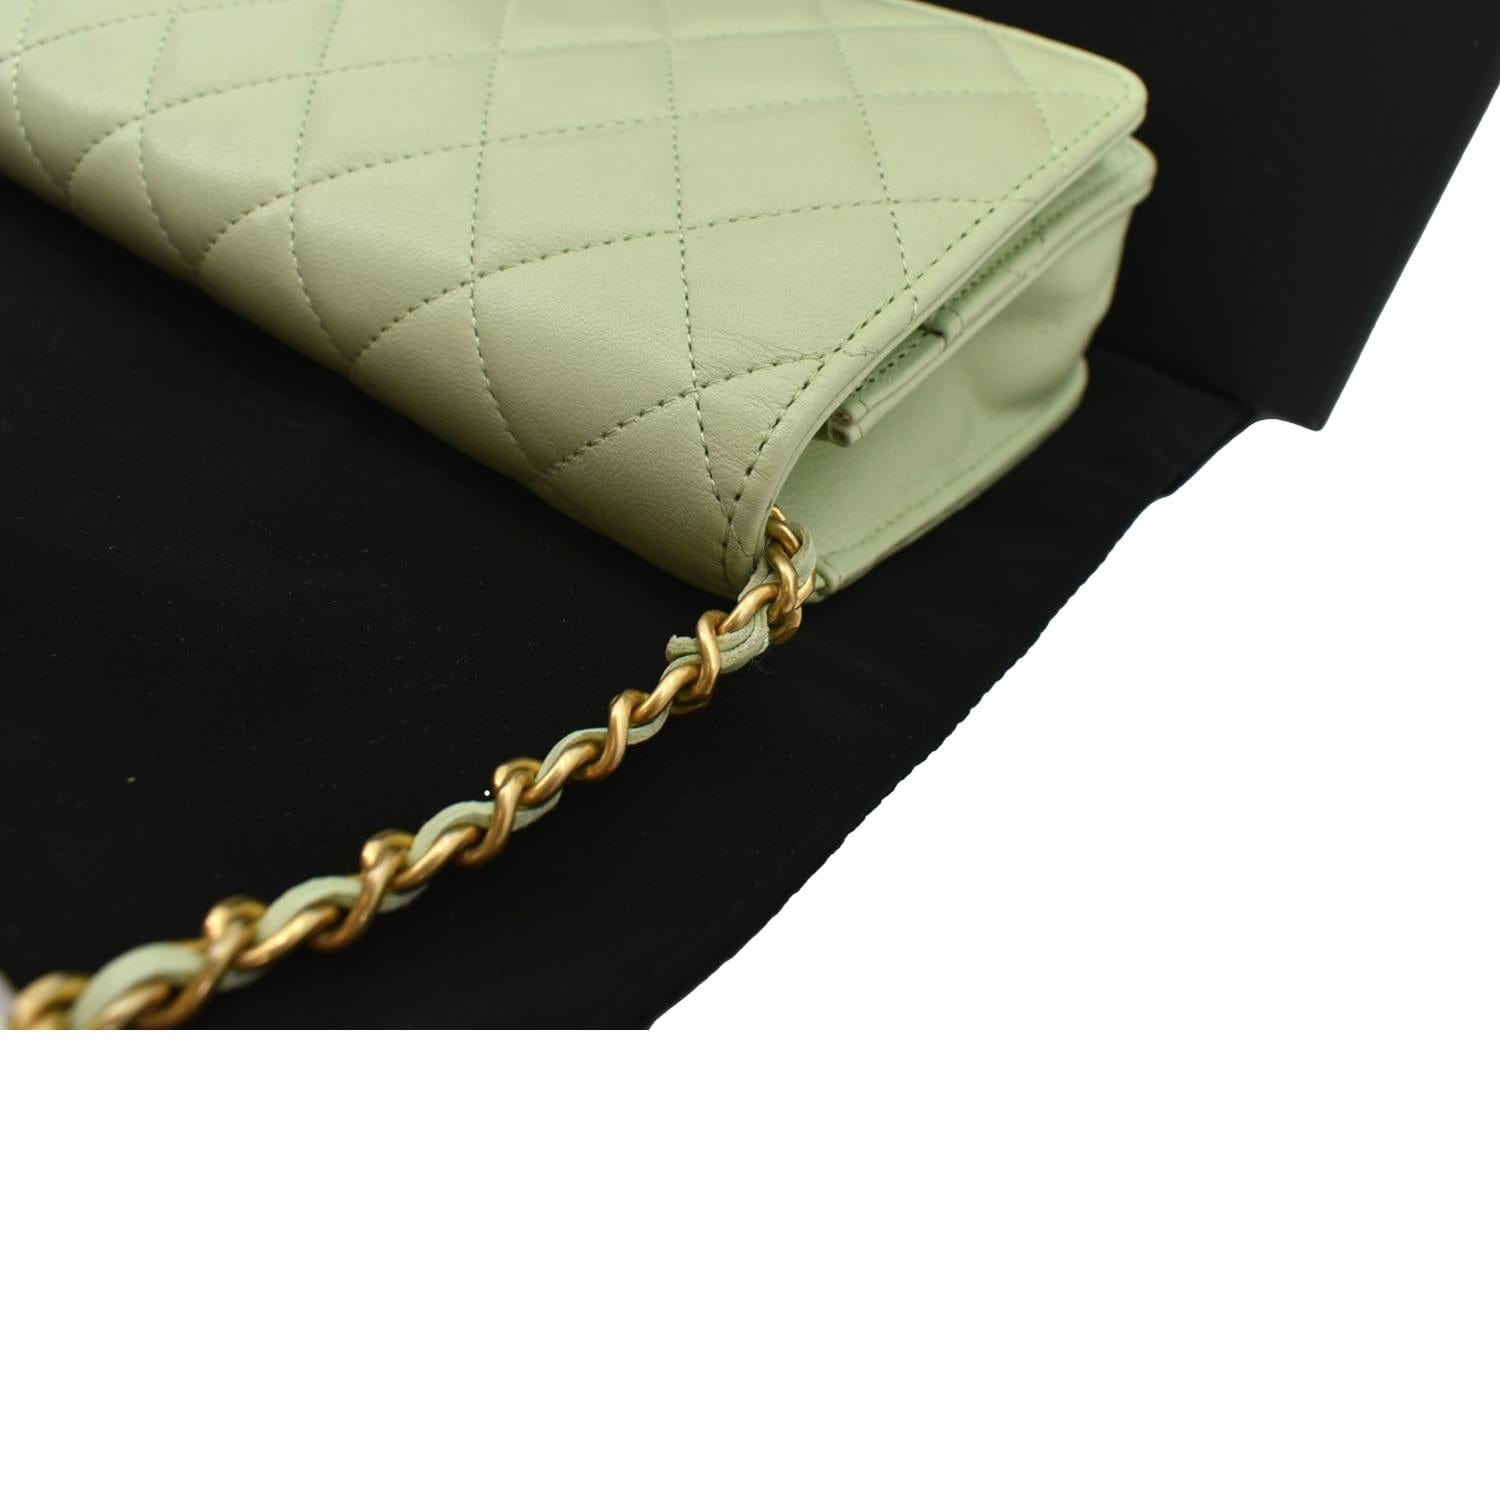 Chanel Quilted Lambskin Wallet on Chain